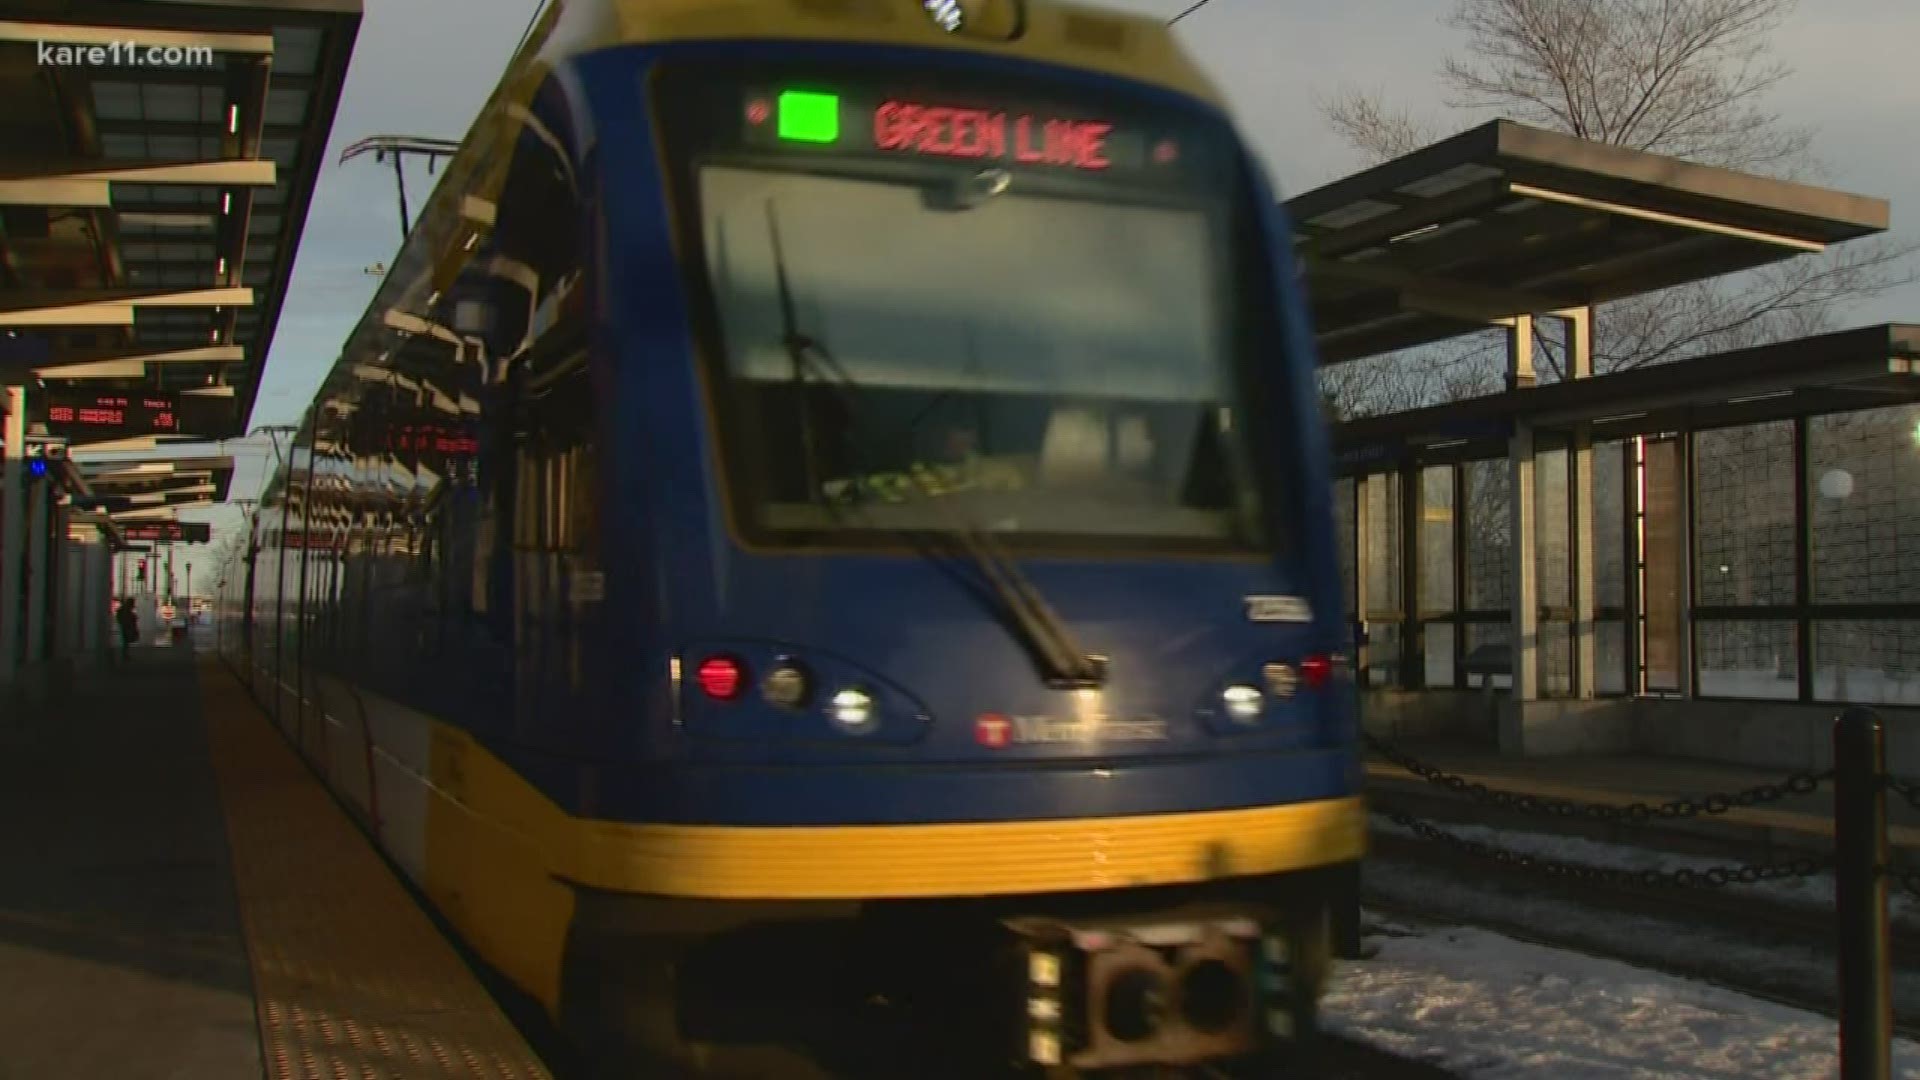 Transit workers are urging legislators to address light-rail safety concerns. Train operators say they often fear for their safety.